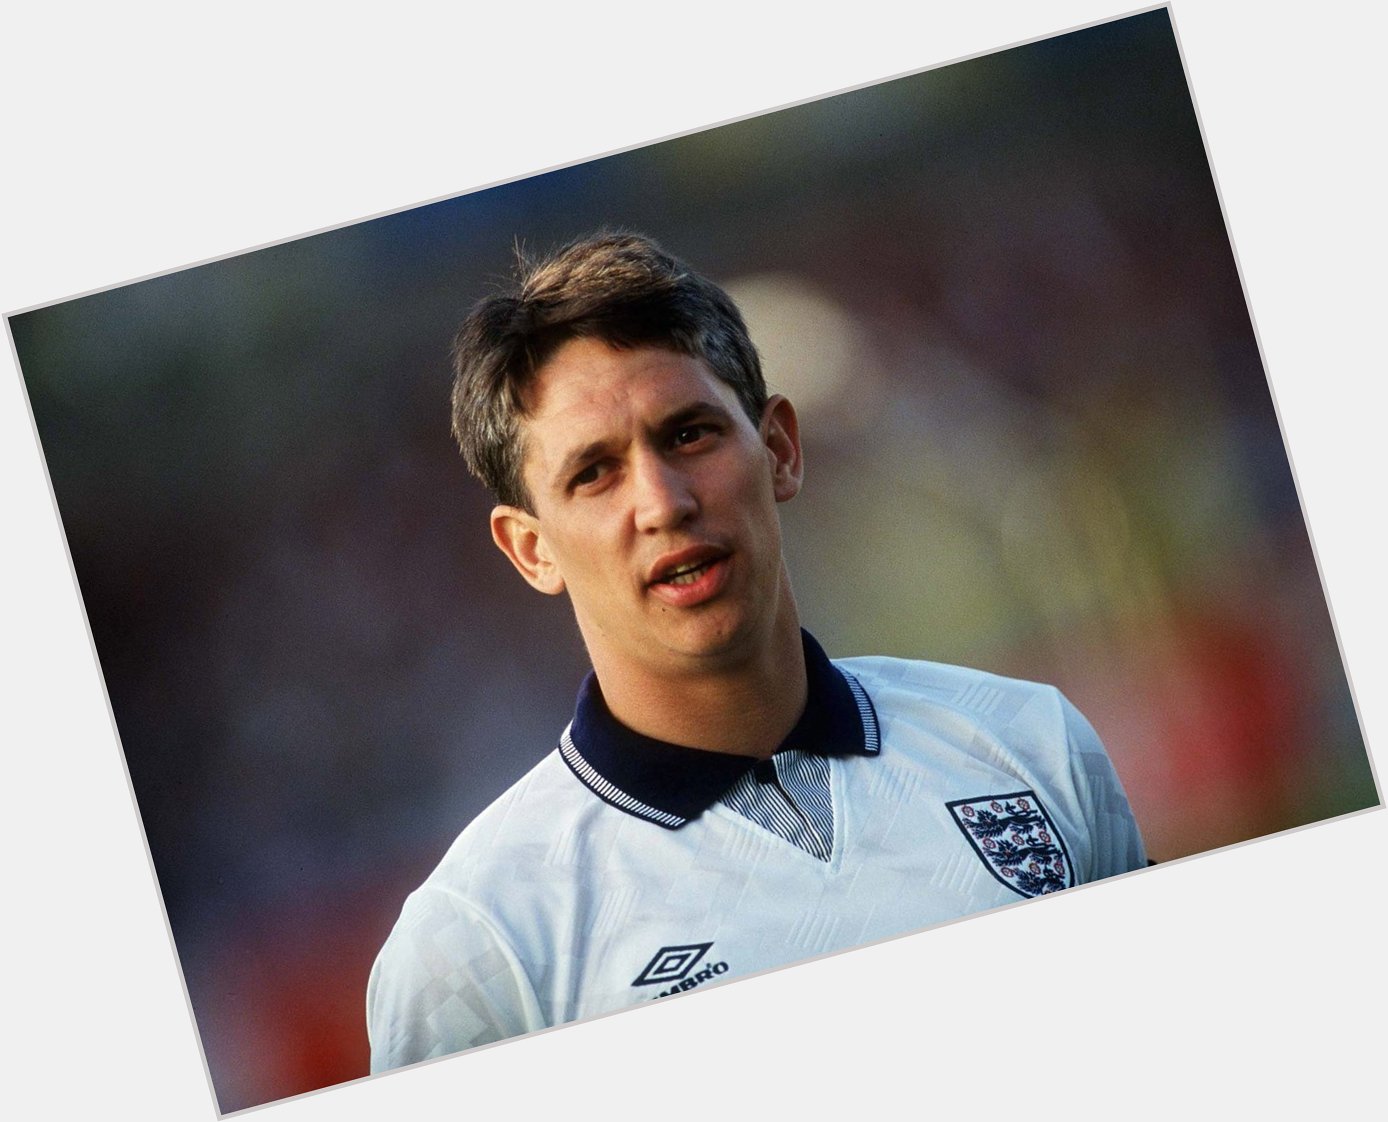 Happy birthday to former Leicester, Everton, Barcelona, Spurs and England striker Gary Lineker, who turns 57 today! 